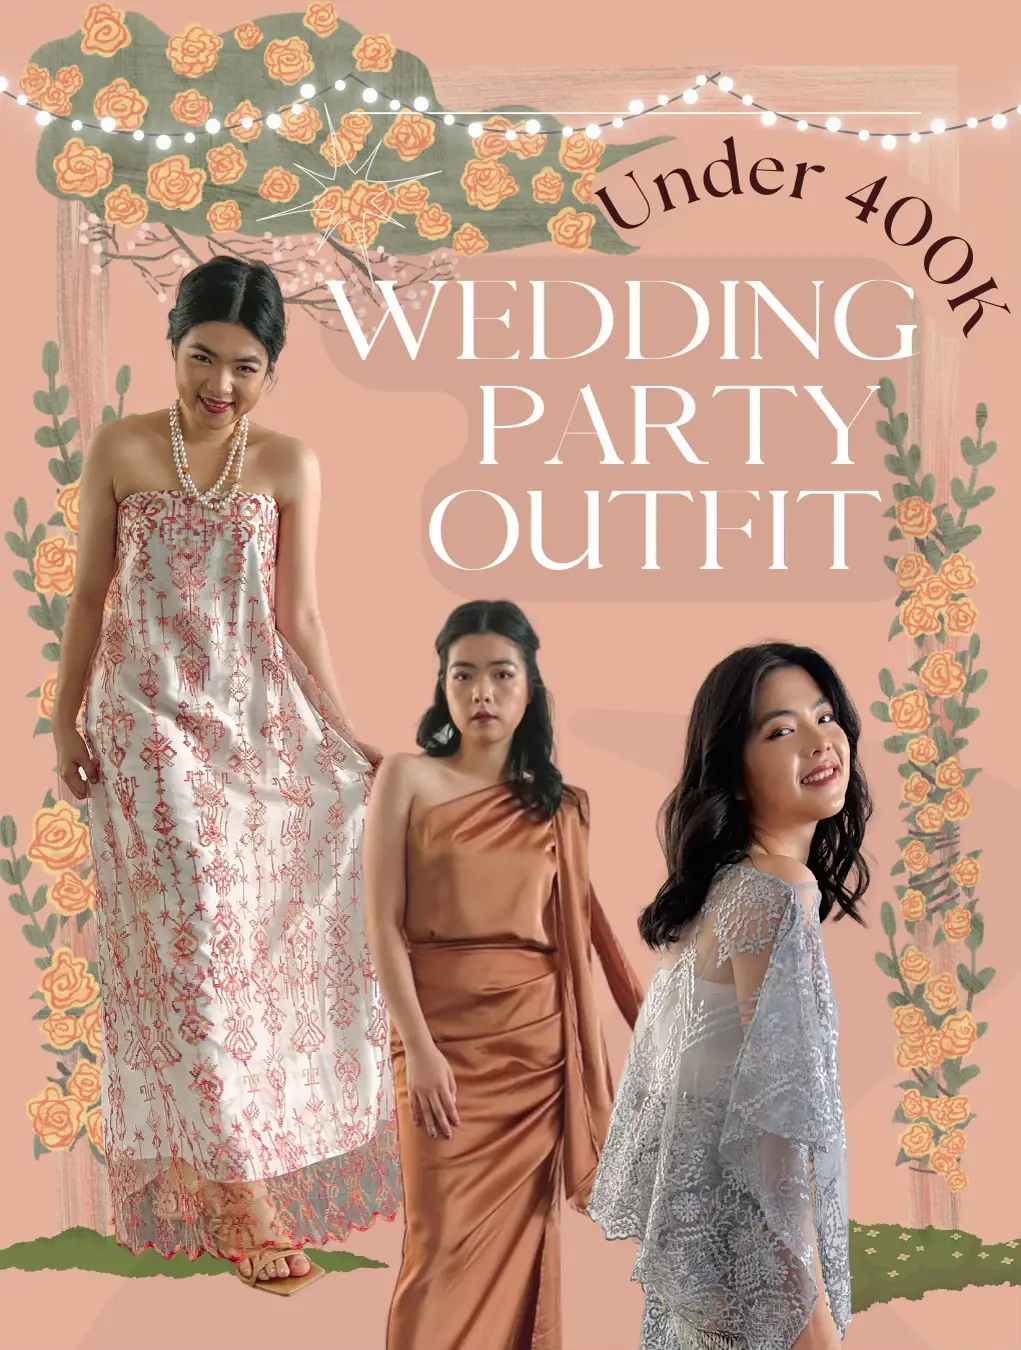 ✨Wedding Party Outfit👰🏻‍♀️ (under 400k!)💰 | Carina E.が投稿